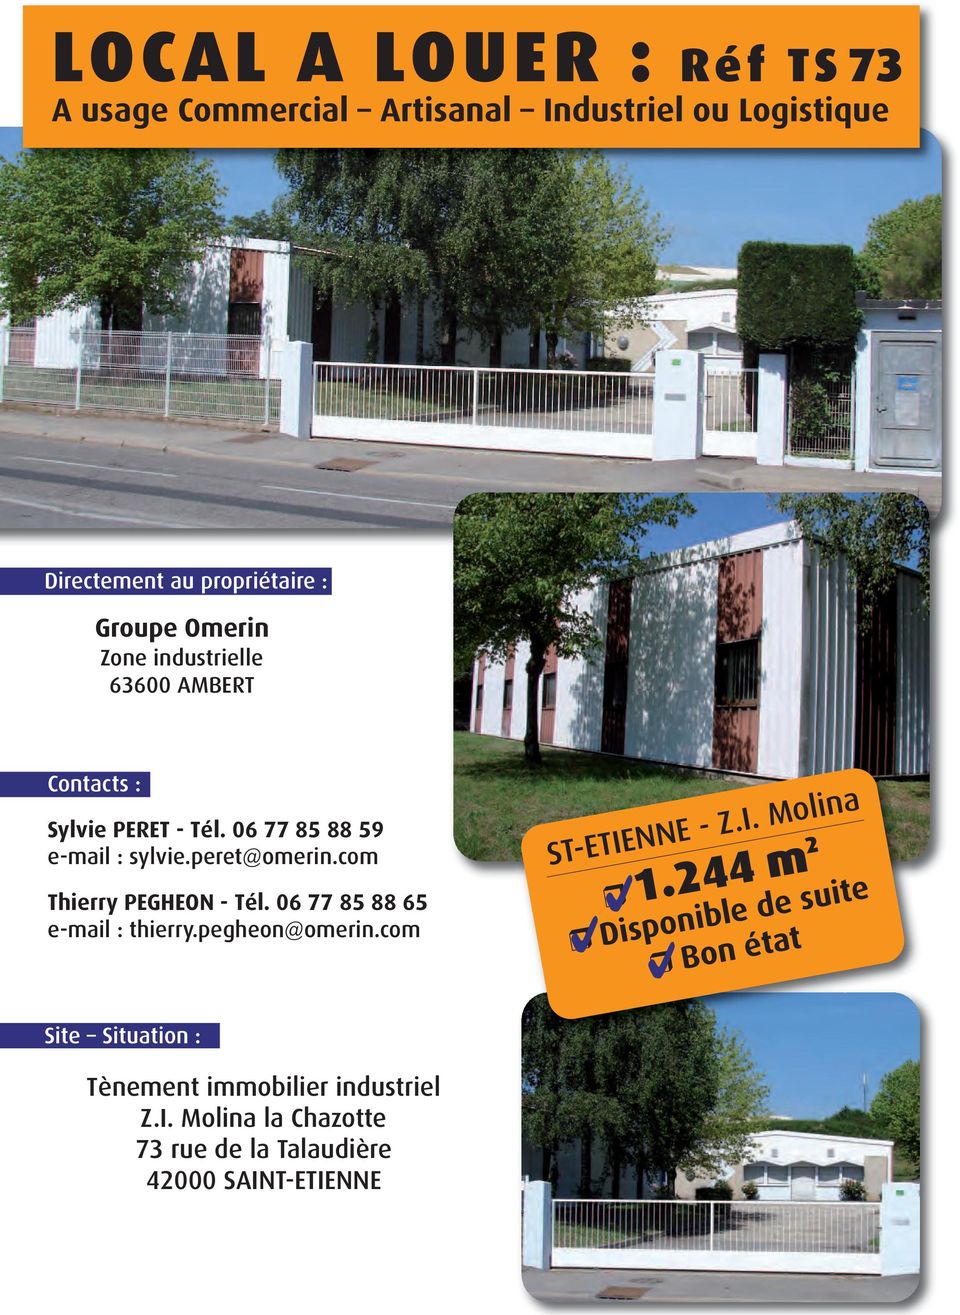 com Thierry PEGHEON - Tél. 06 77 85 88 65 e-mail : thierry.pegheon@omerin.com ST-ETIENNE - Z.I. Molina 1.